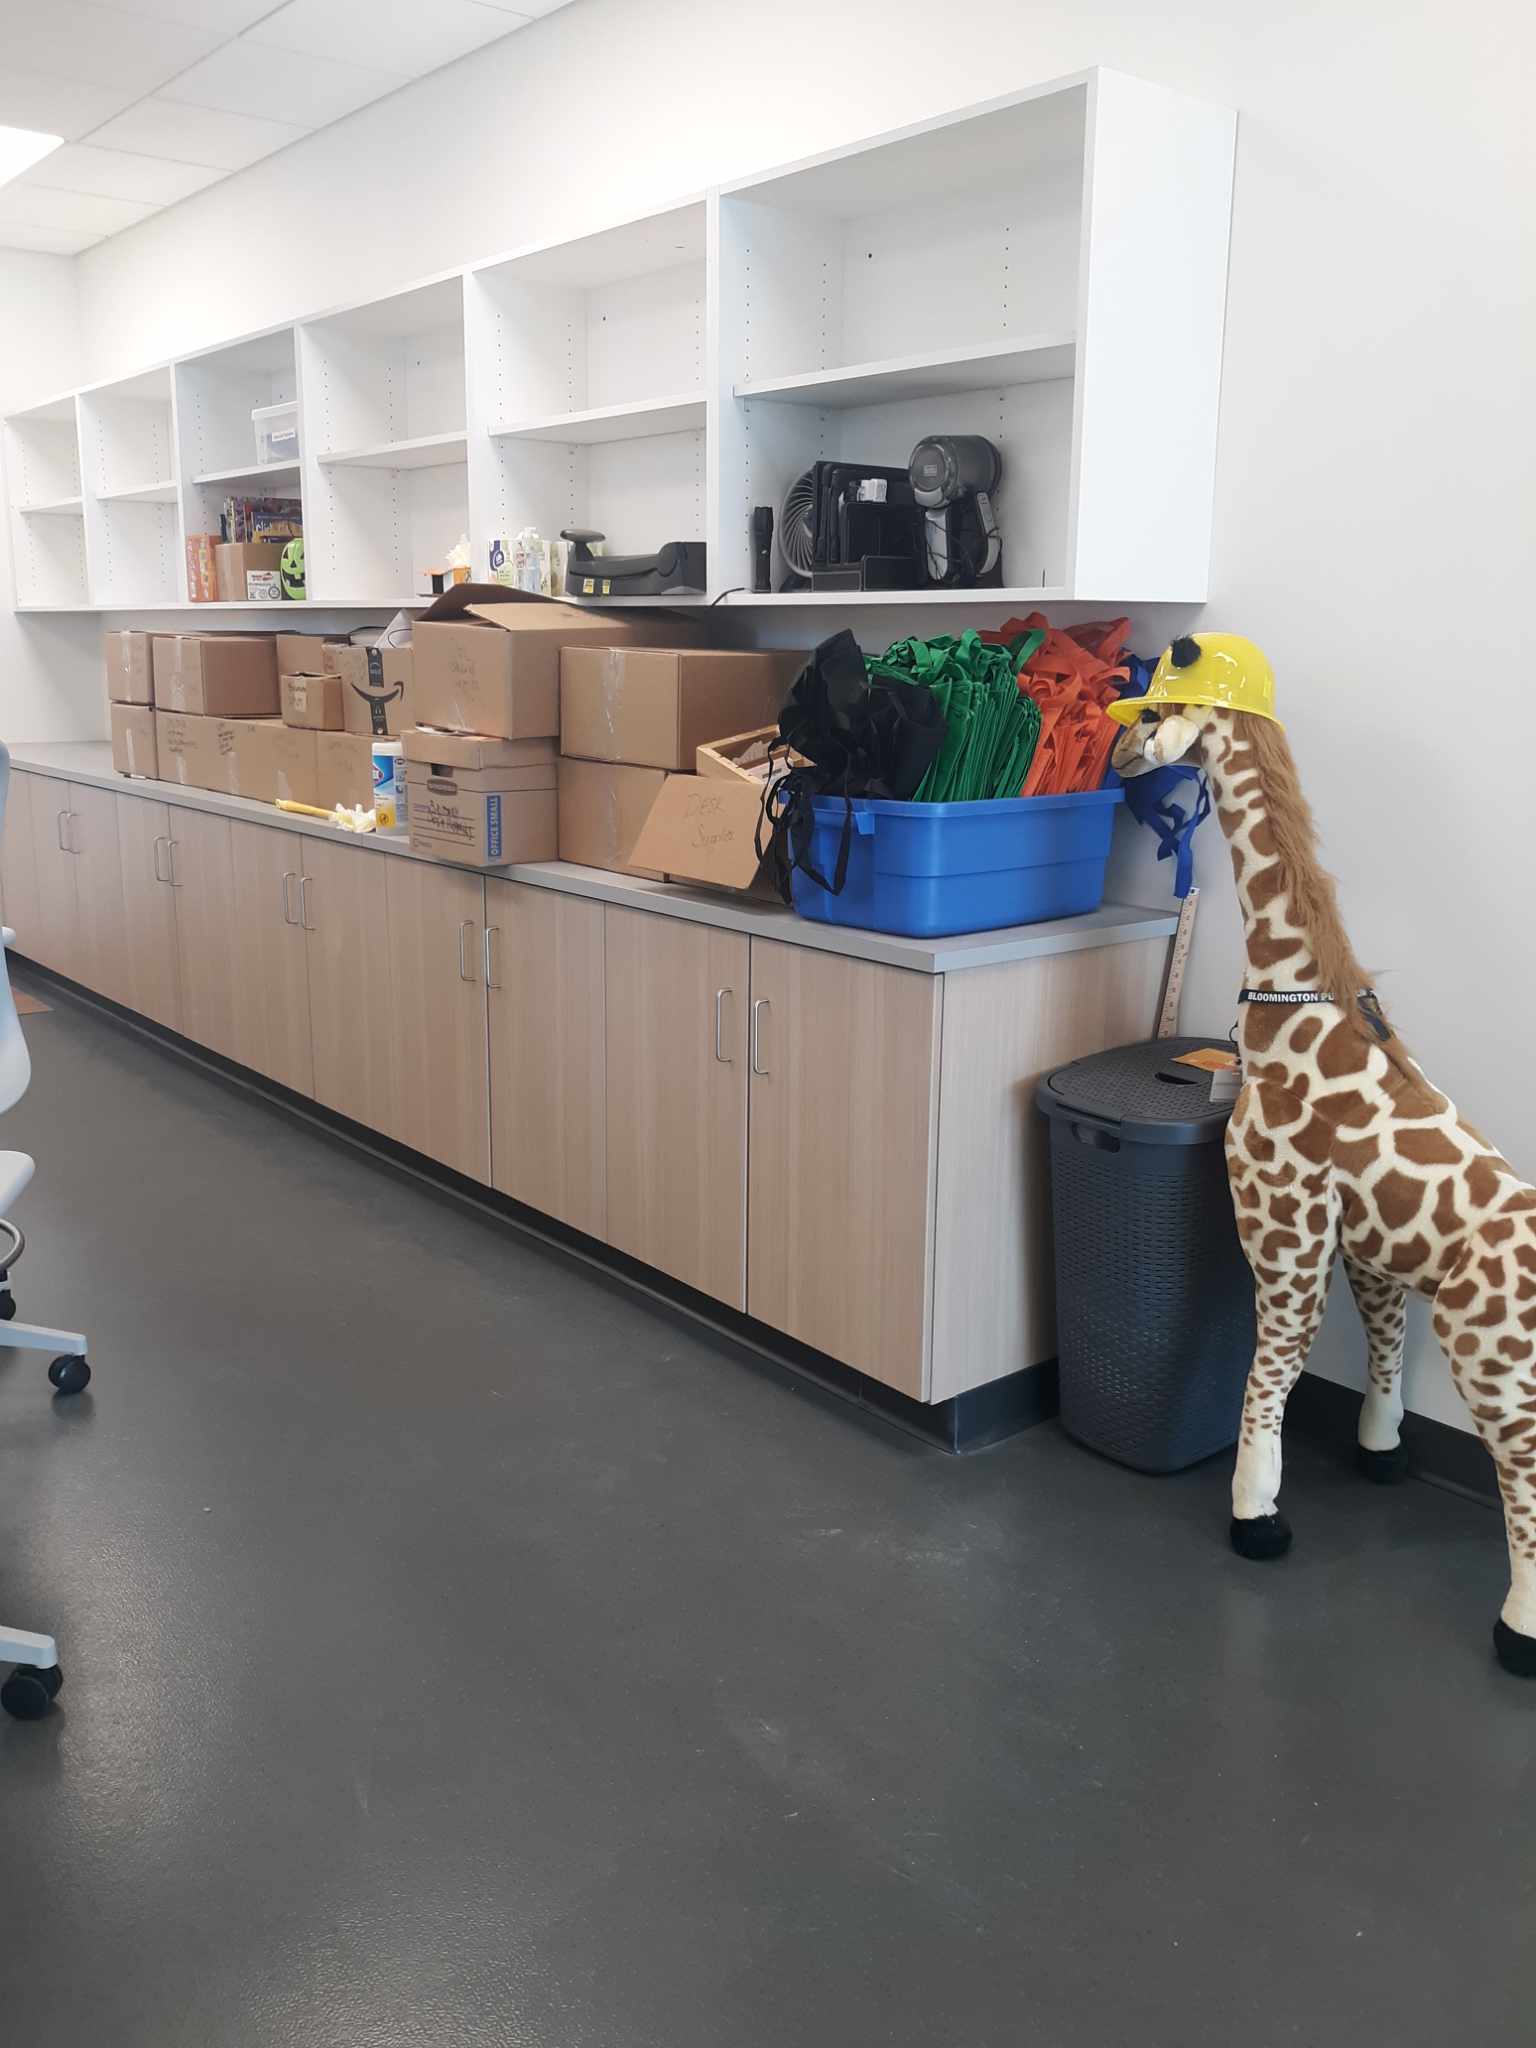 Melvin, the plush giraffe library mascot helping move items to the new circulation work room area on the newly opened west side of the building.